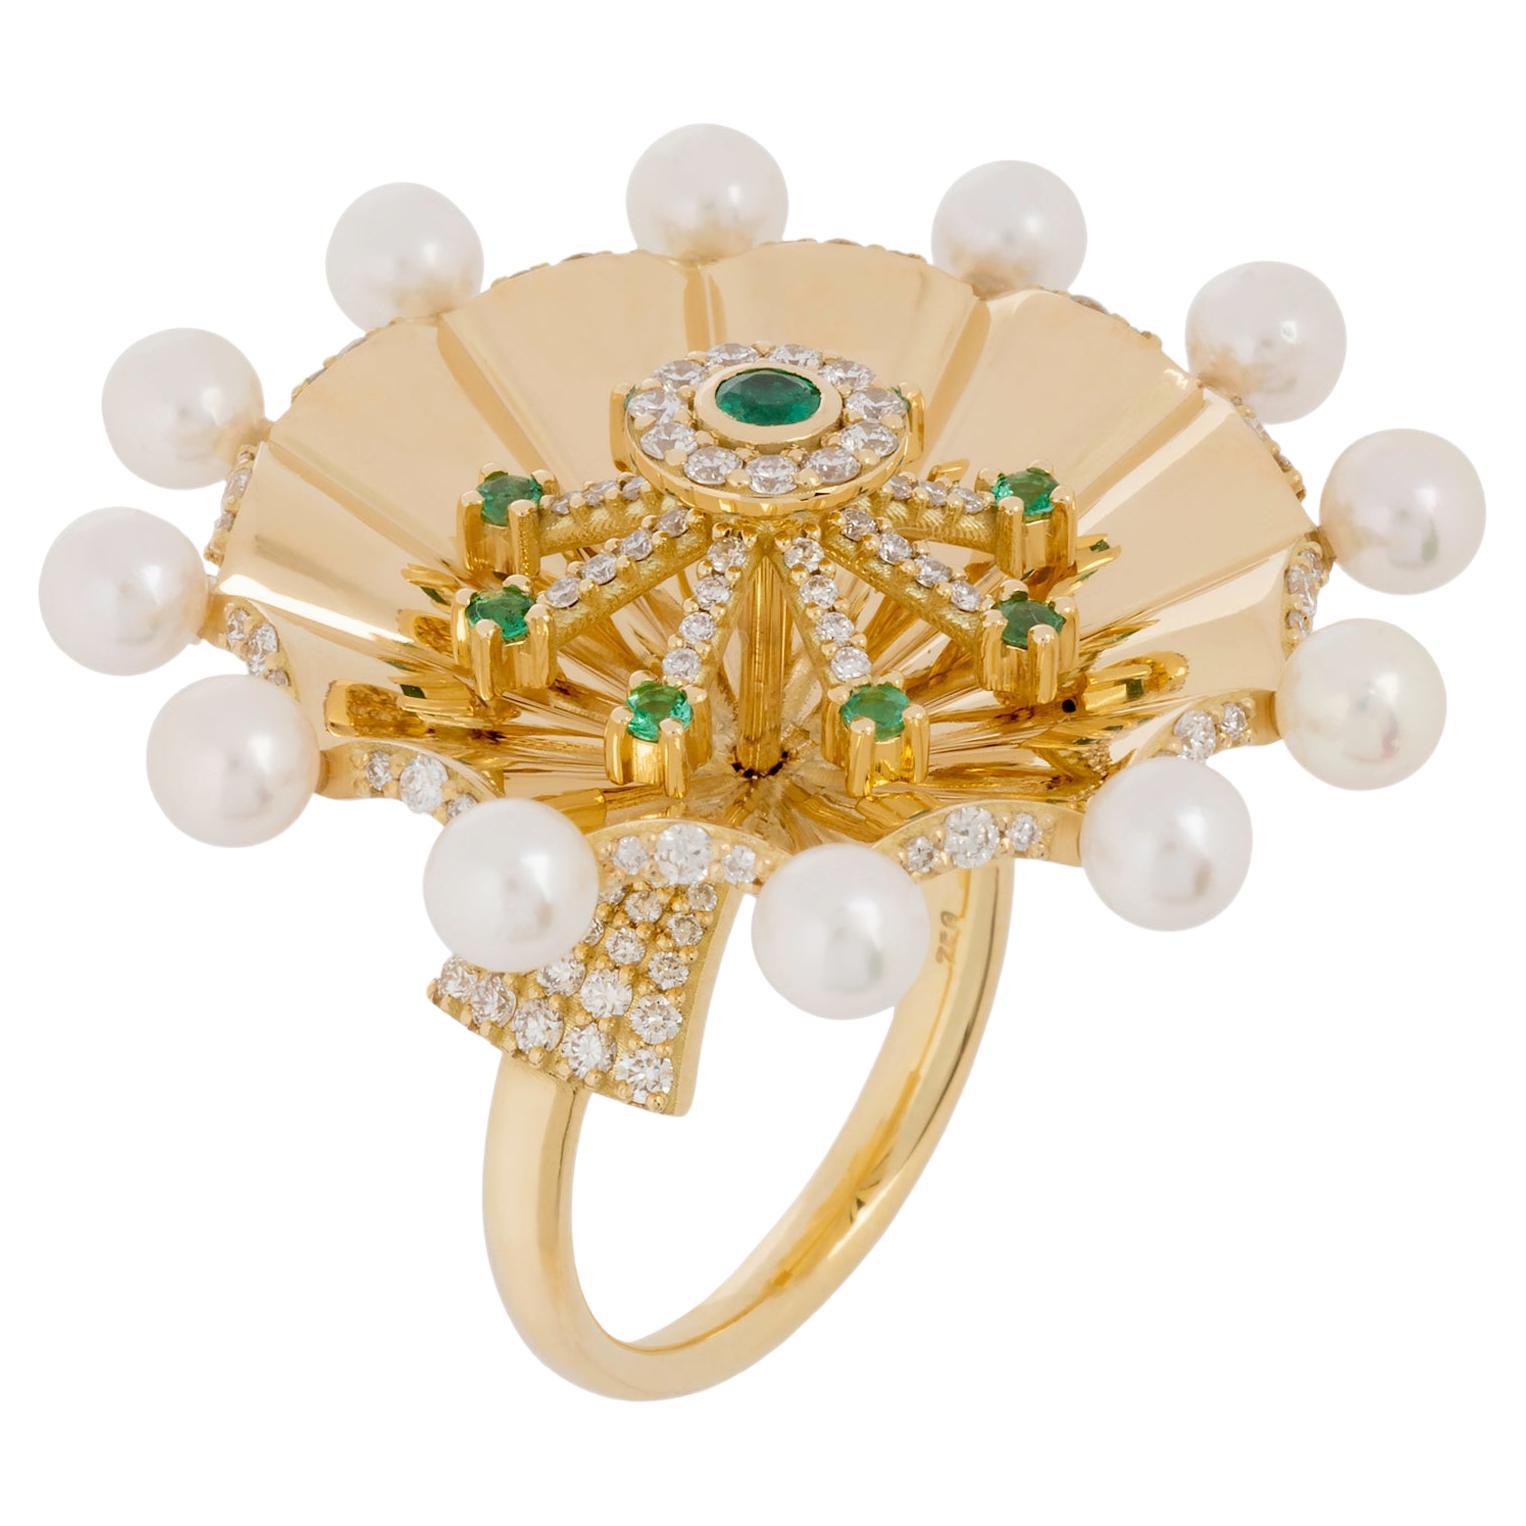 Buy quality 916 Gold Anitque Umbrella Ring in Ahmedabad